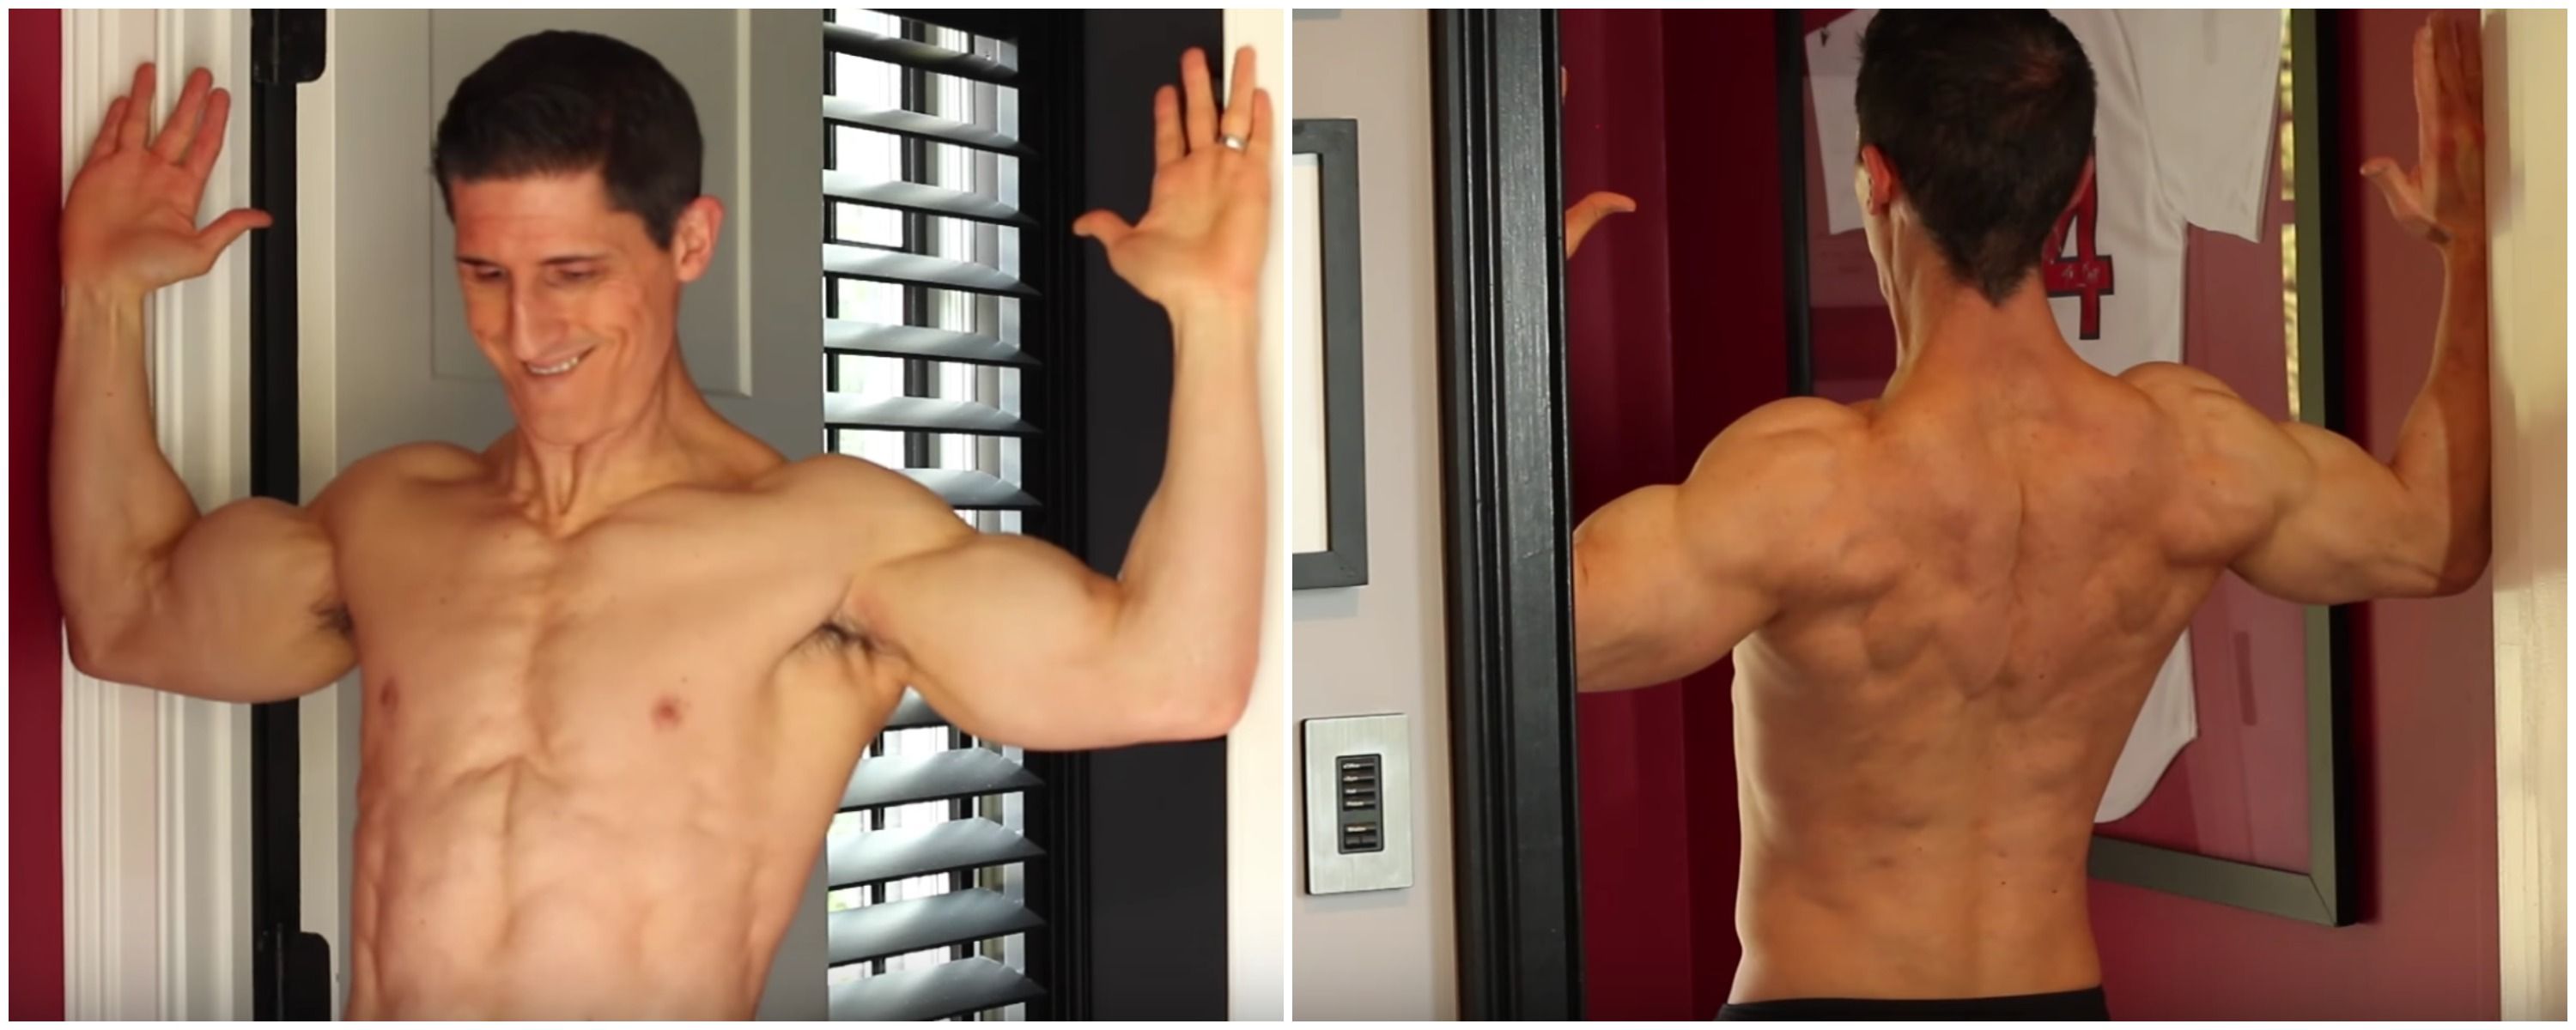 Athlean-X Shows How to Do the Face Pull Back Workout at Home